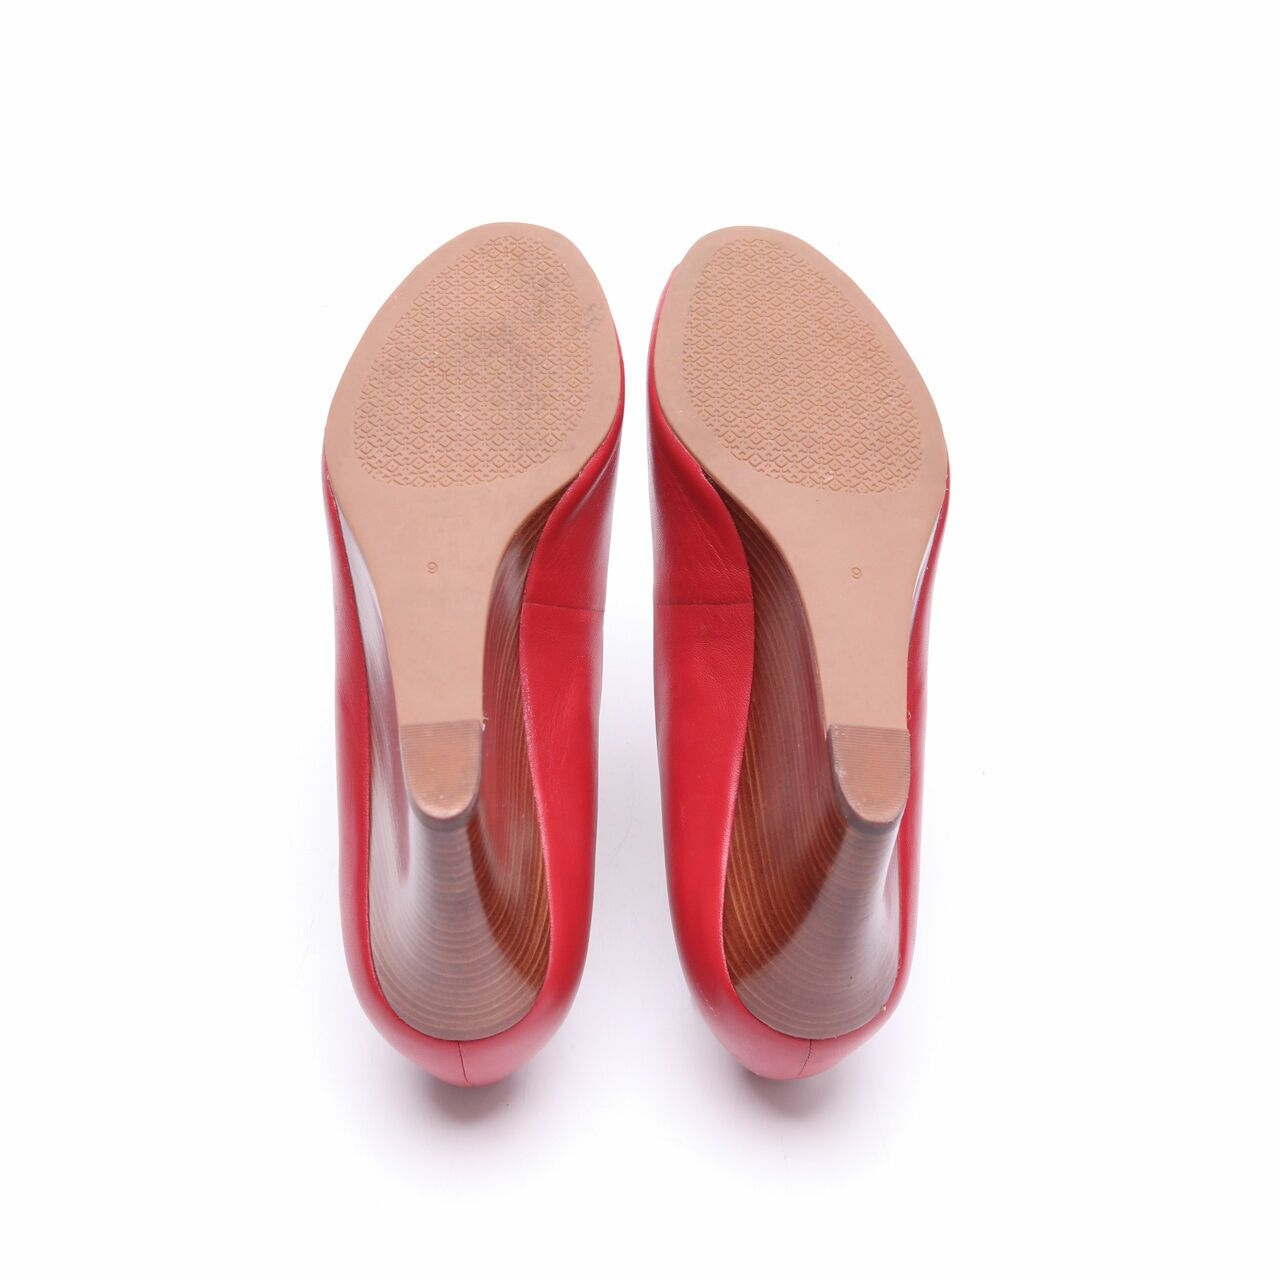 Tory Burch Sally Tumbled Leather Red Peep-toe Wedges